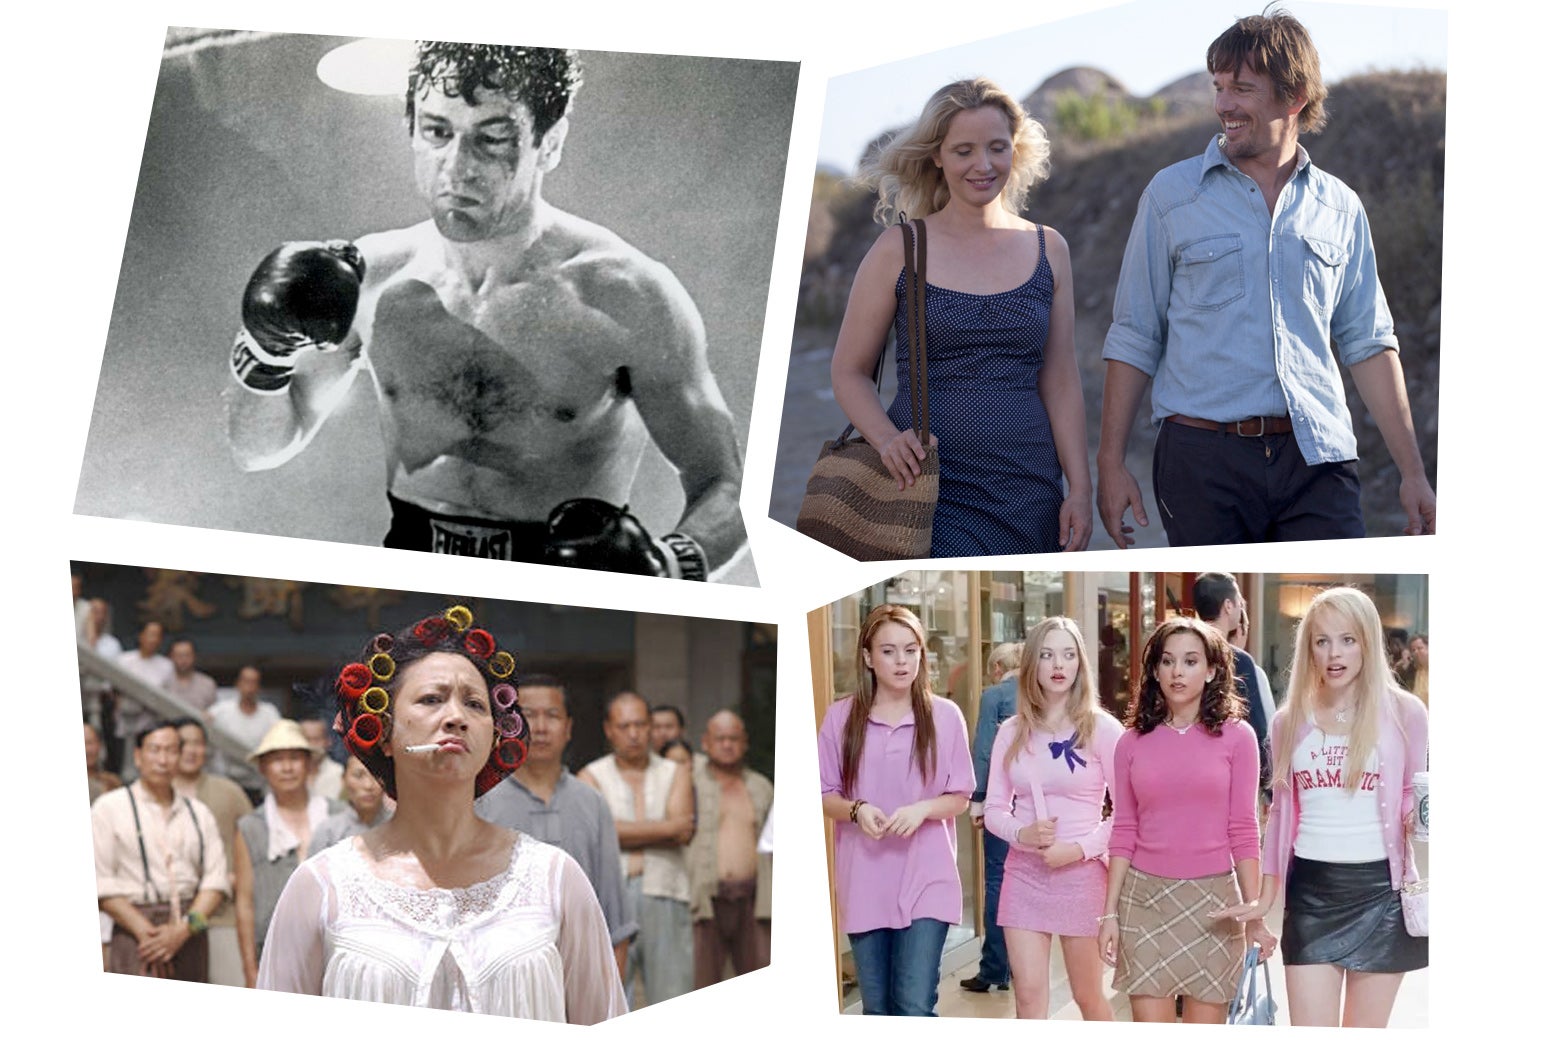 Clockwise: A still of Robert De Niro as boxer Jake La Motta in the boxing ring from Raging Bull; A still of Ethan Hawke and Julie Delpy happily walking down a well-lit pathway from Before Midnight; A still of four girls all wearing pink tops walking down a school hallway from Mean Girls; A still of an Asian woman with rollers in her hair and a cigarette sticking out of her pursed lips scrutanizing something in the distance with men gathering behind her from Kung Fu Hustle. 